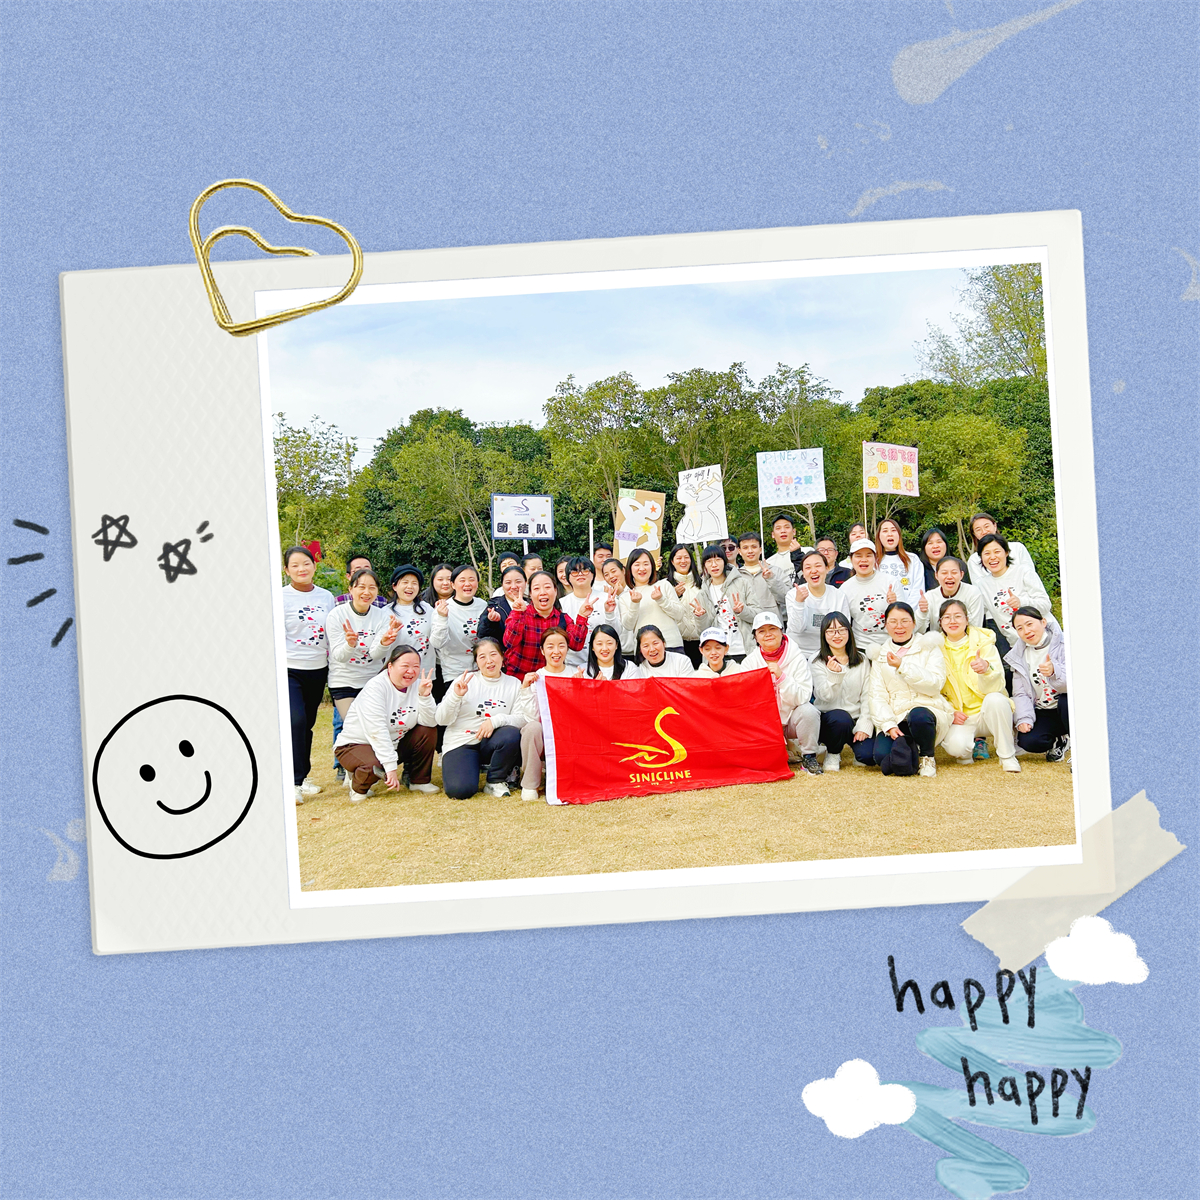 Sinicline (SUN NATURE) Team Building Day: A Day of Unity And Happiness